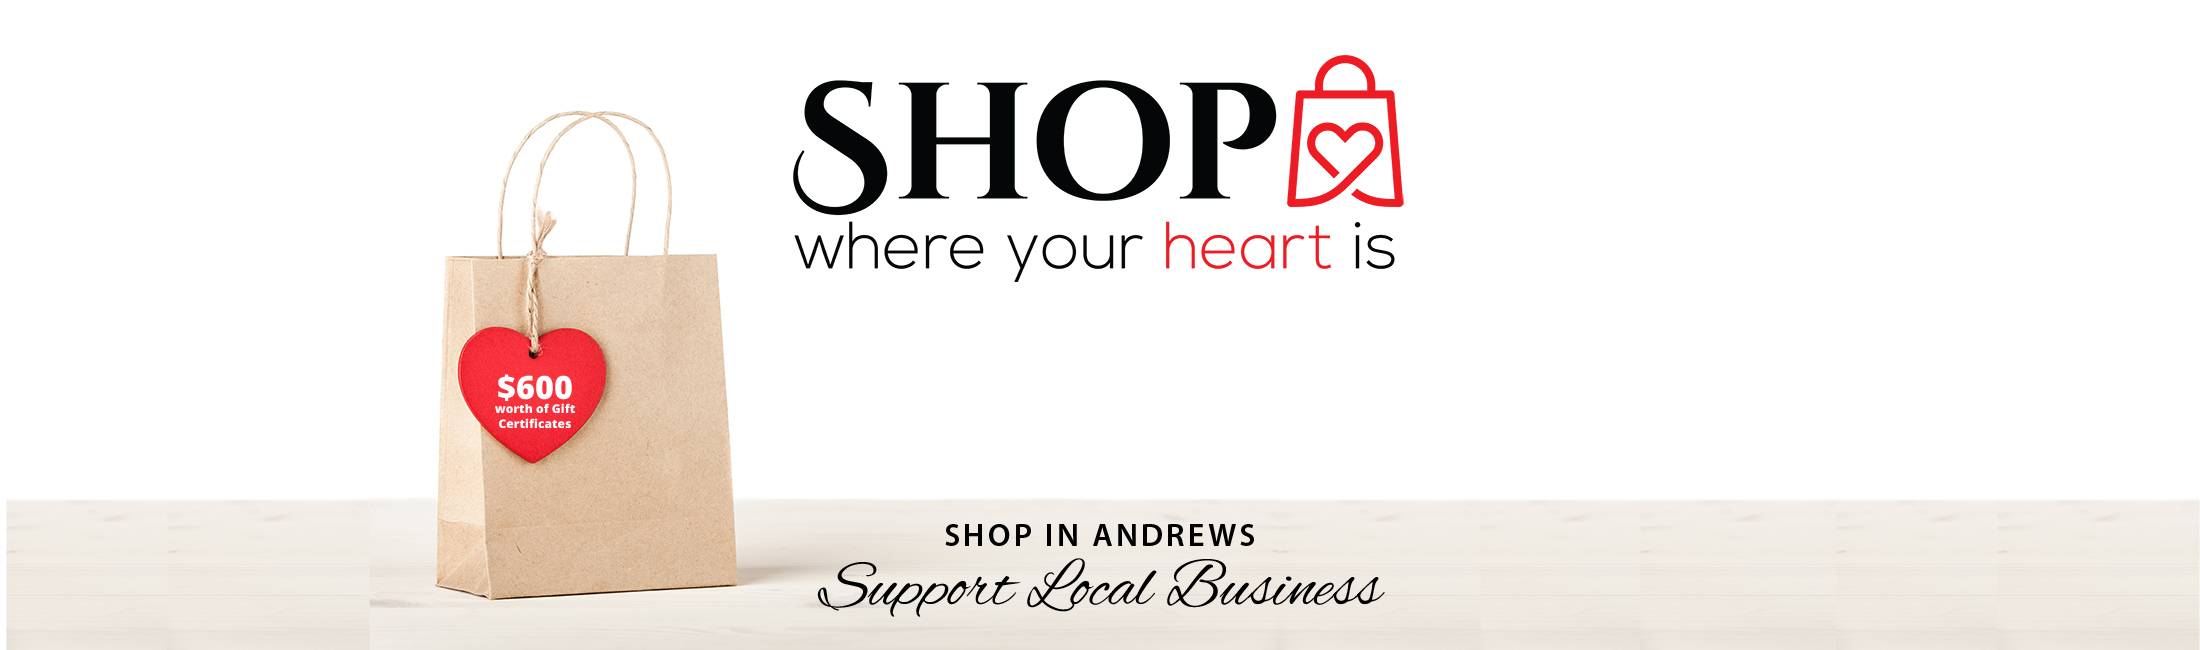 Shop Where Your Heart Is